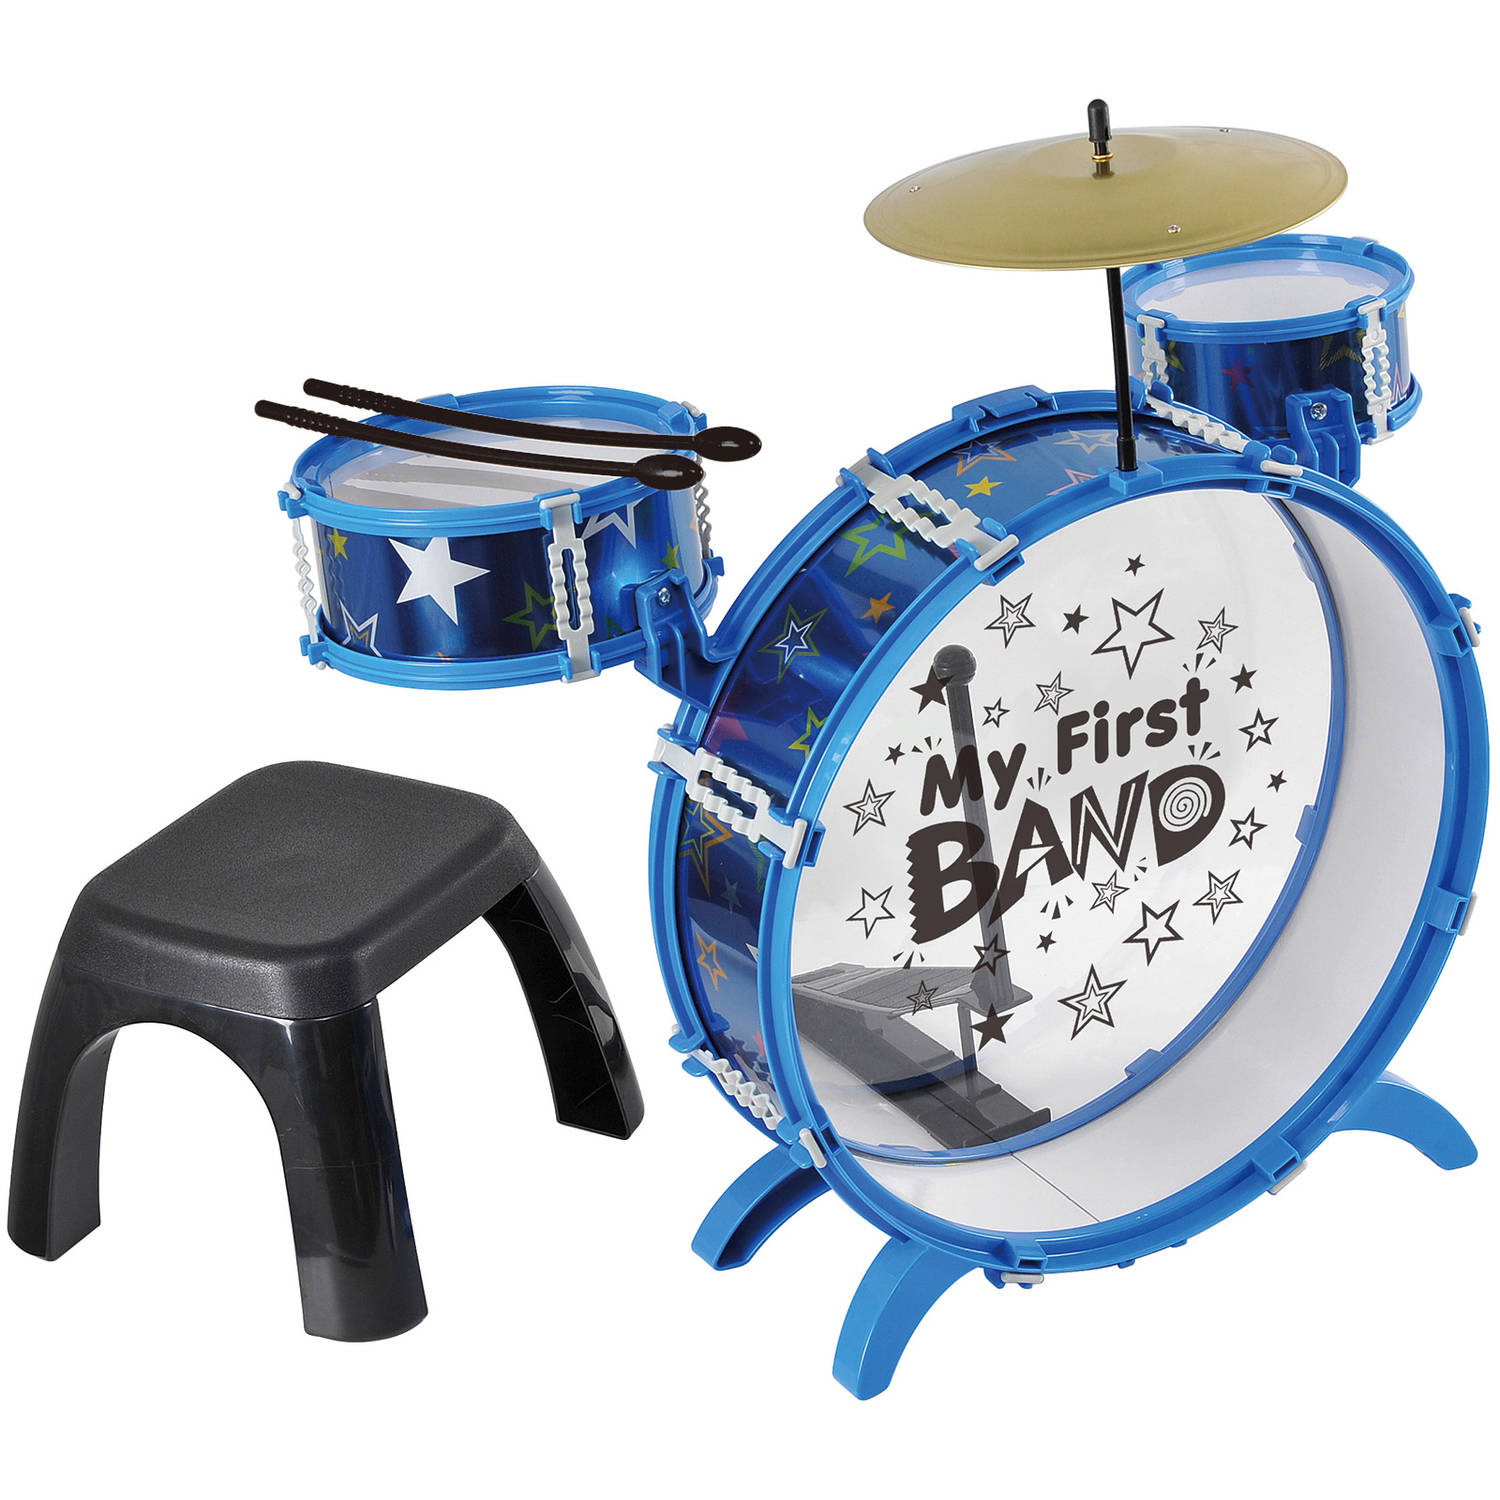 Kid Connection My First Metal Drum Set, Blue - image 1 of 2